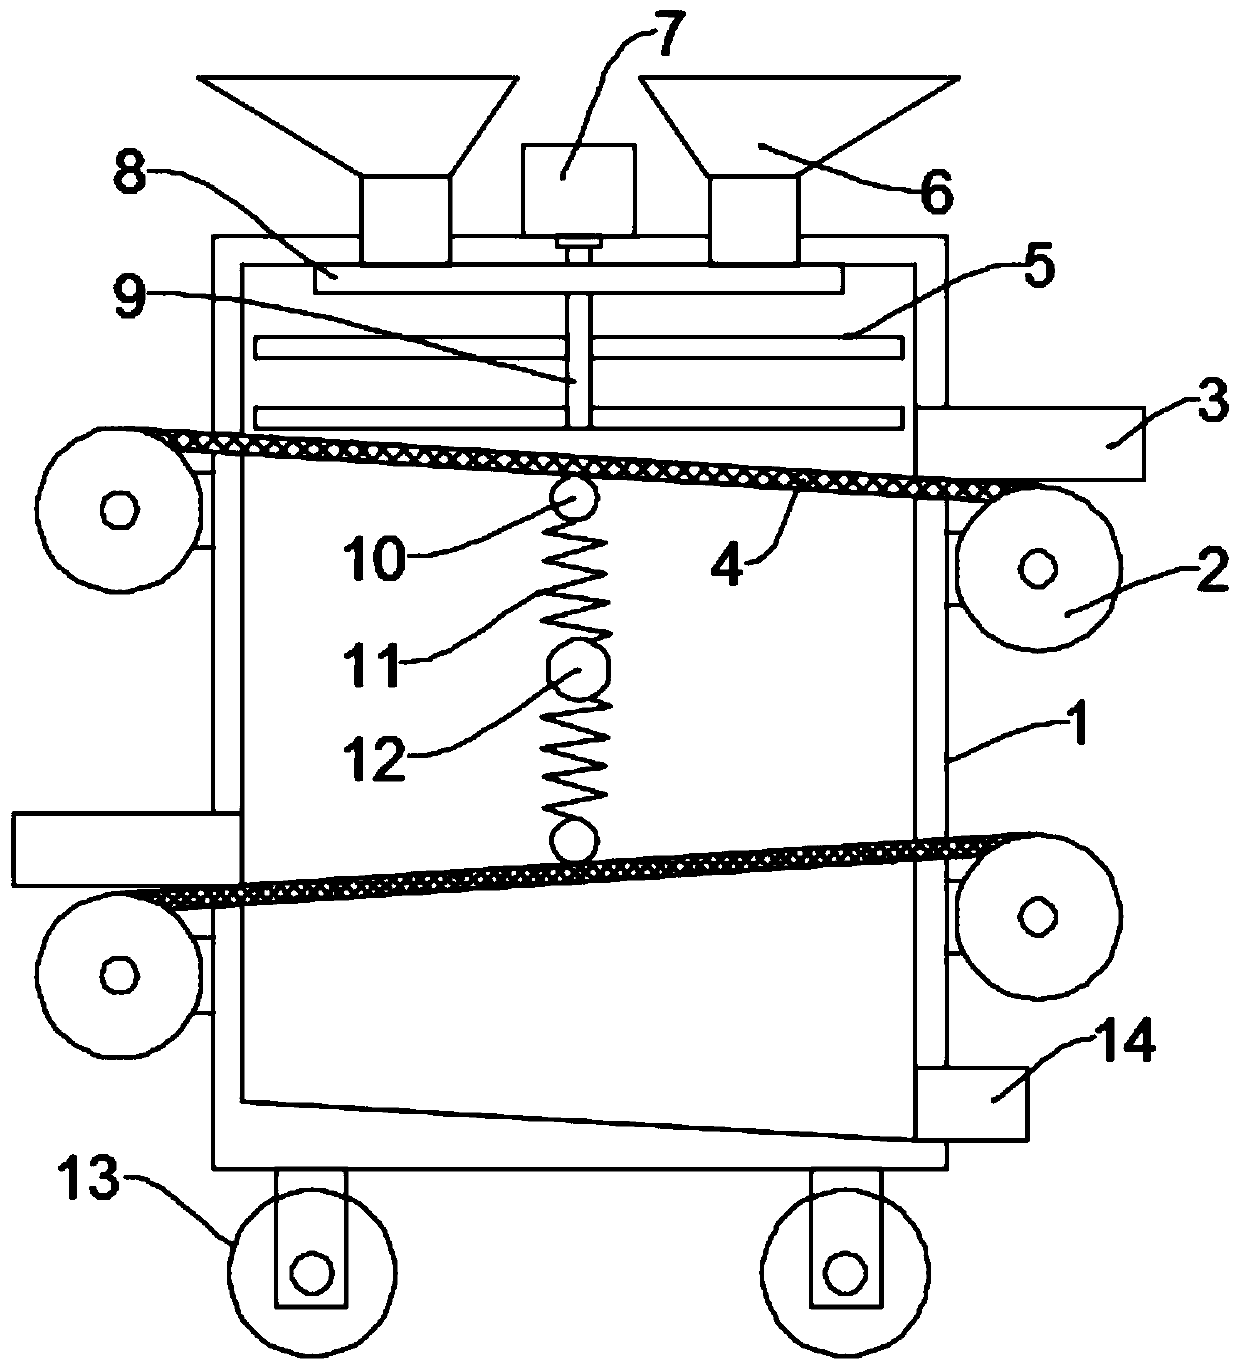 Gravel sieving device capable of conveniently adjusting sieving sizes